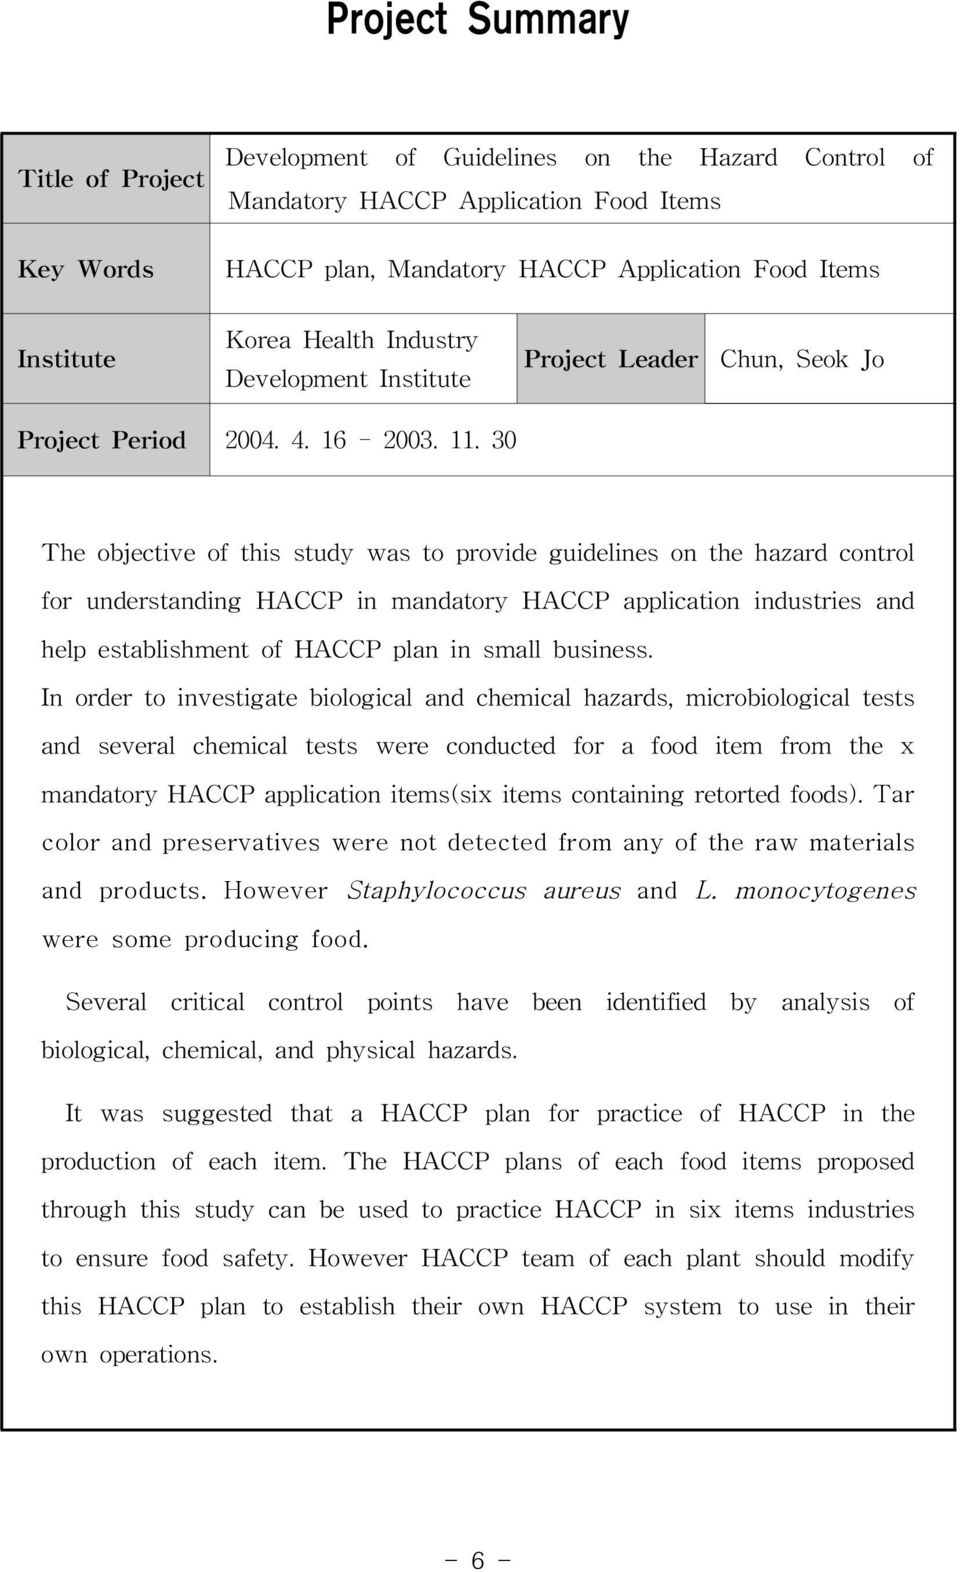 30 The objective of this study was to provide guidelines on the hazard control for understanding HACCP in mandatory HACCP application industries and help establishment of HACCP plan in small business.